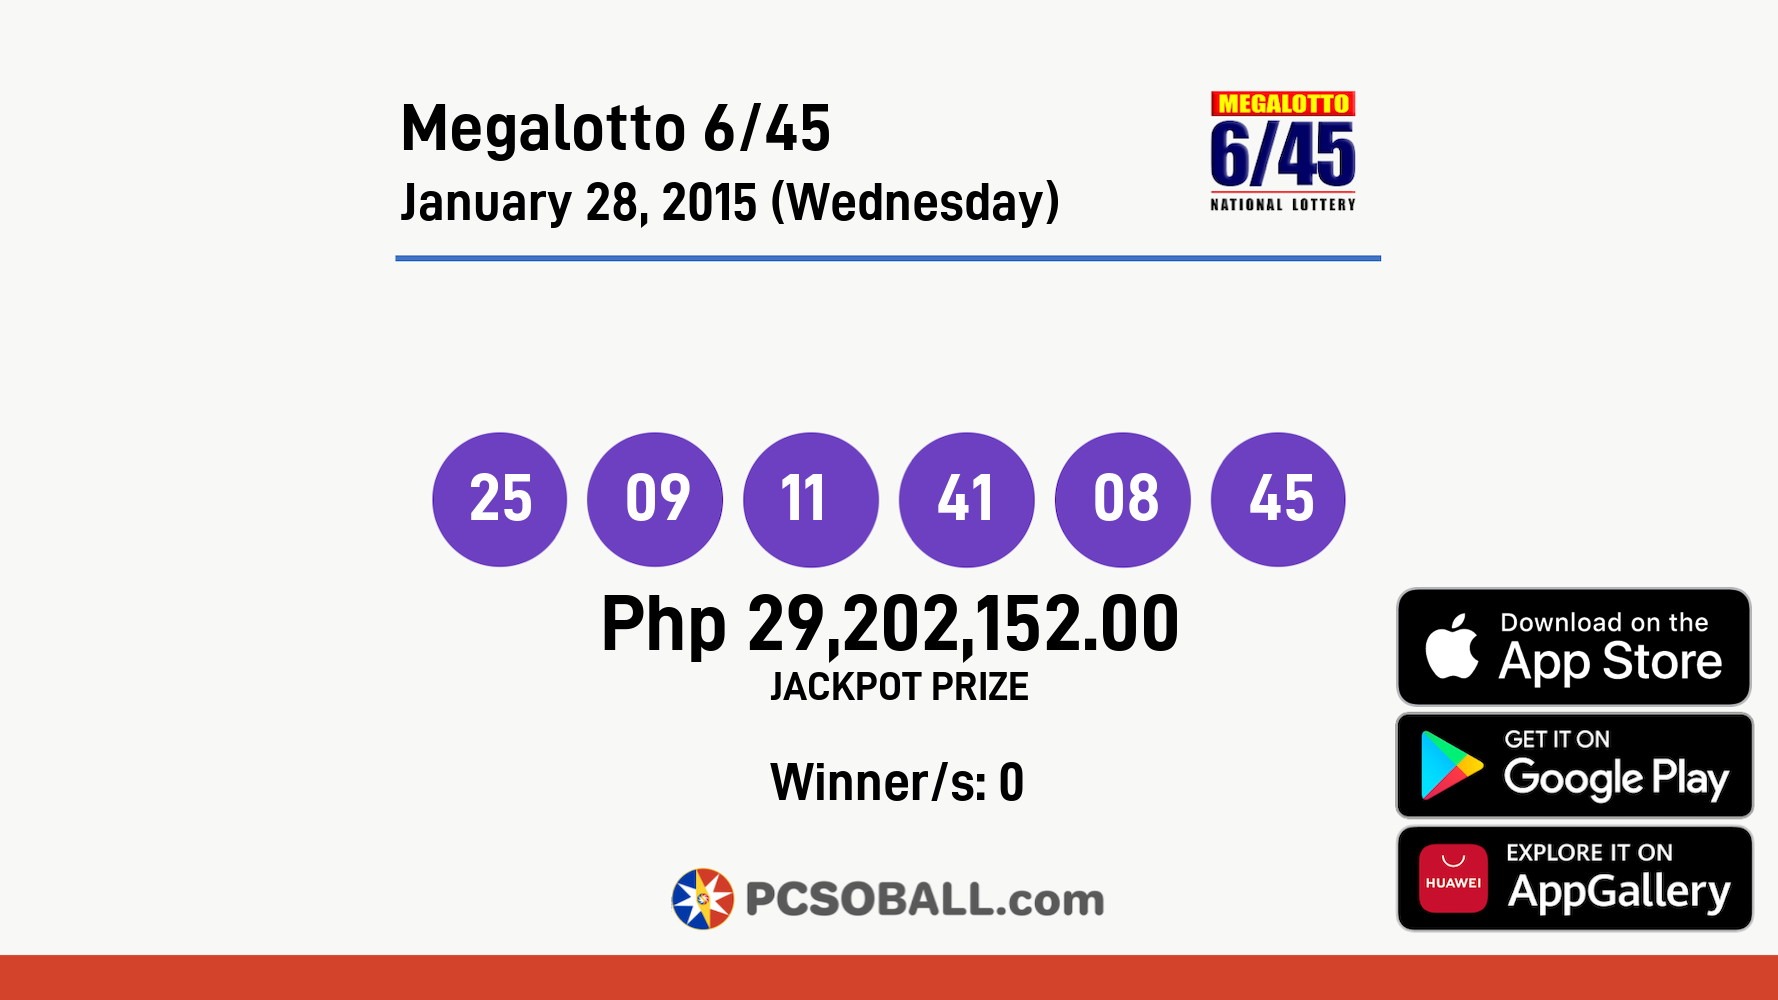 Megalotto 6/45 January 28, 2015 (Wednesday) Result